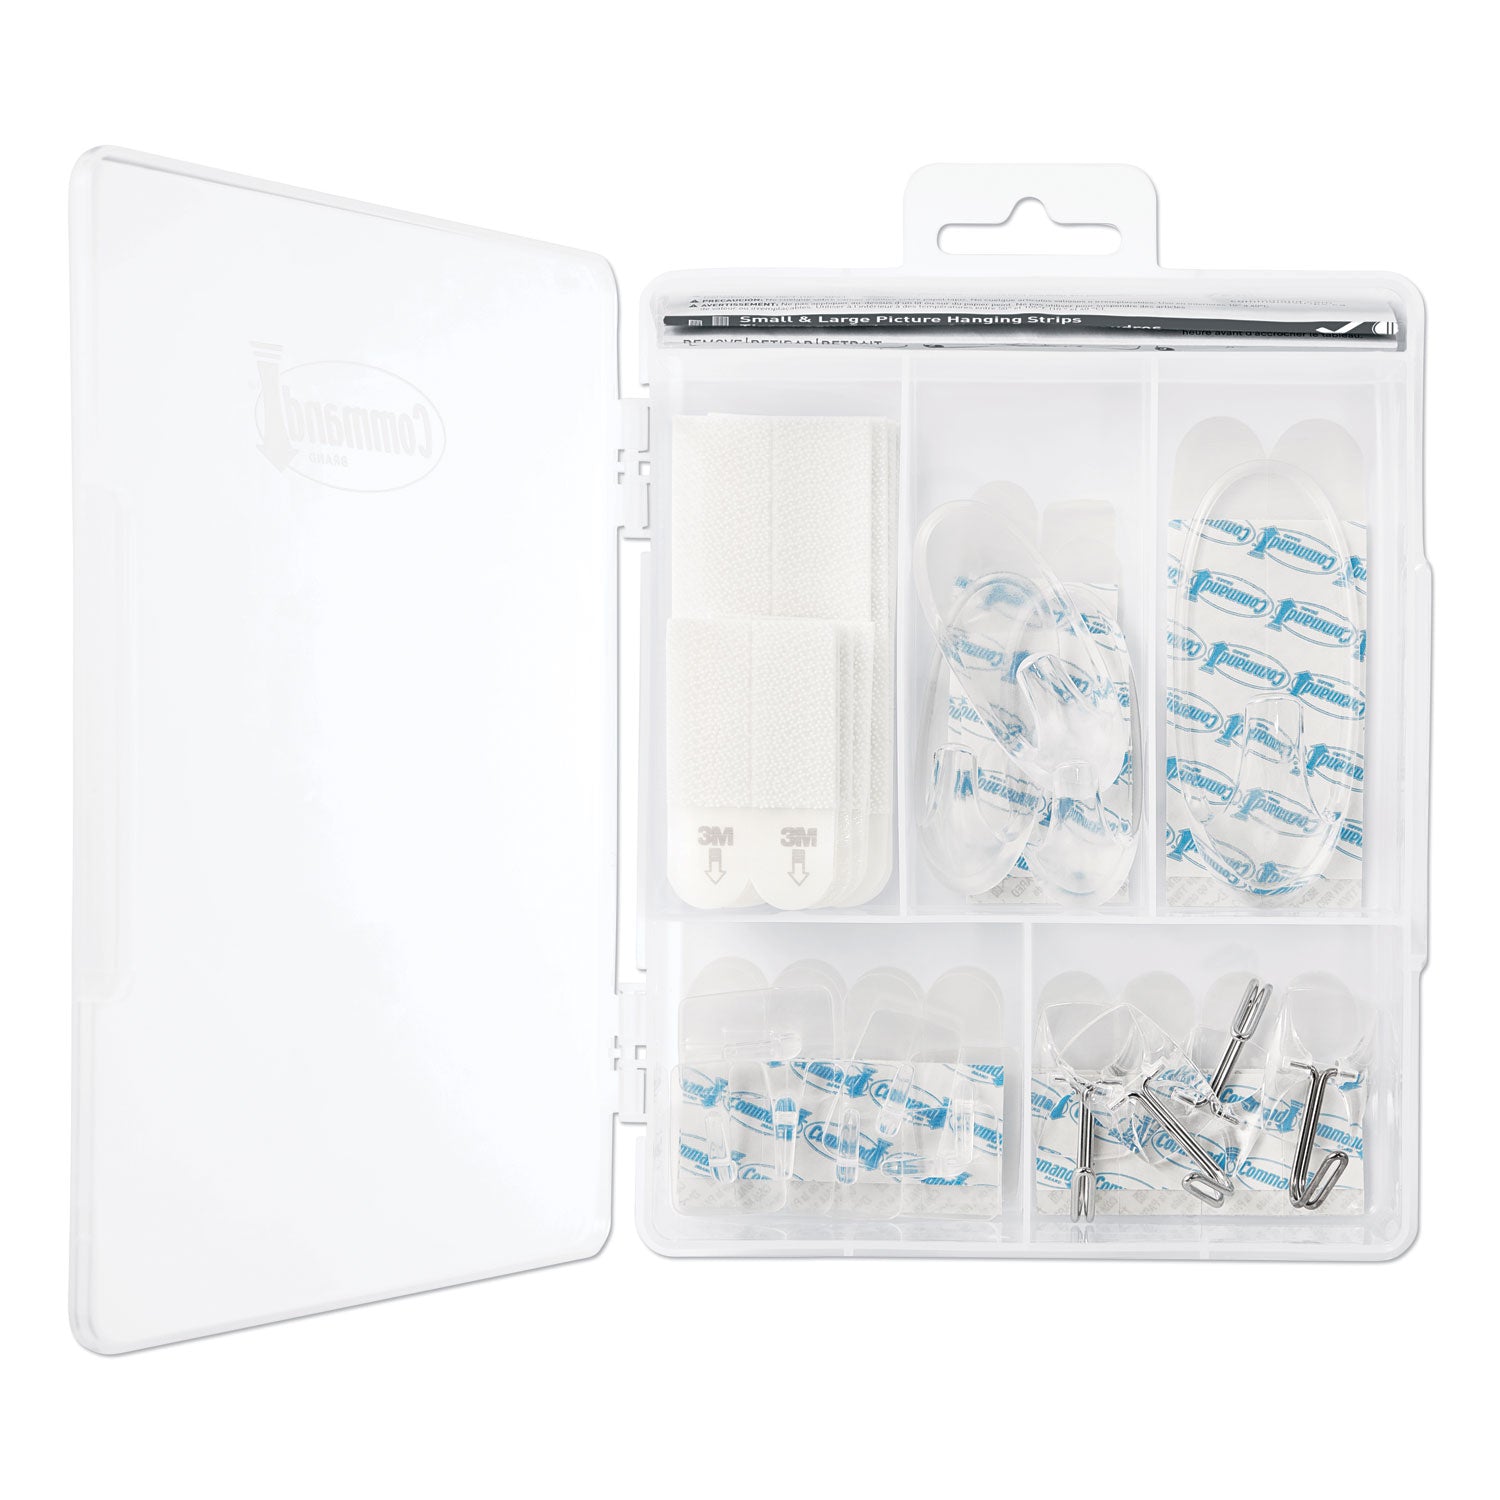 clear-hooks-and-strips-assorted-sizes-plastic-005-lb;-2-lb;-4-16-lb-capacities-16-picture-strips-15-hooks-22-strips-pack_mmm17232es - 2